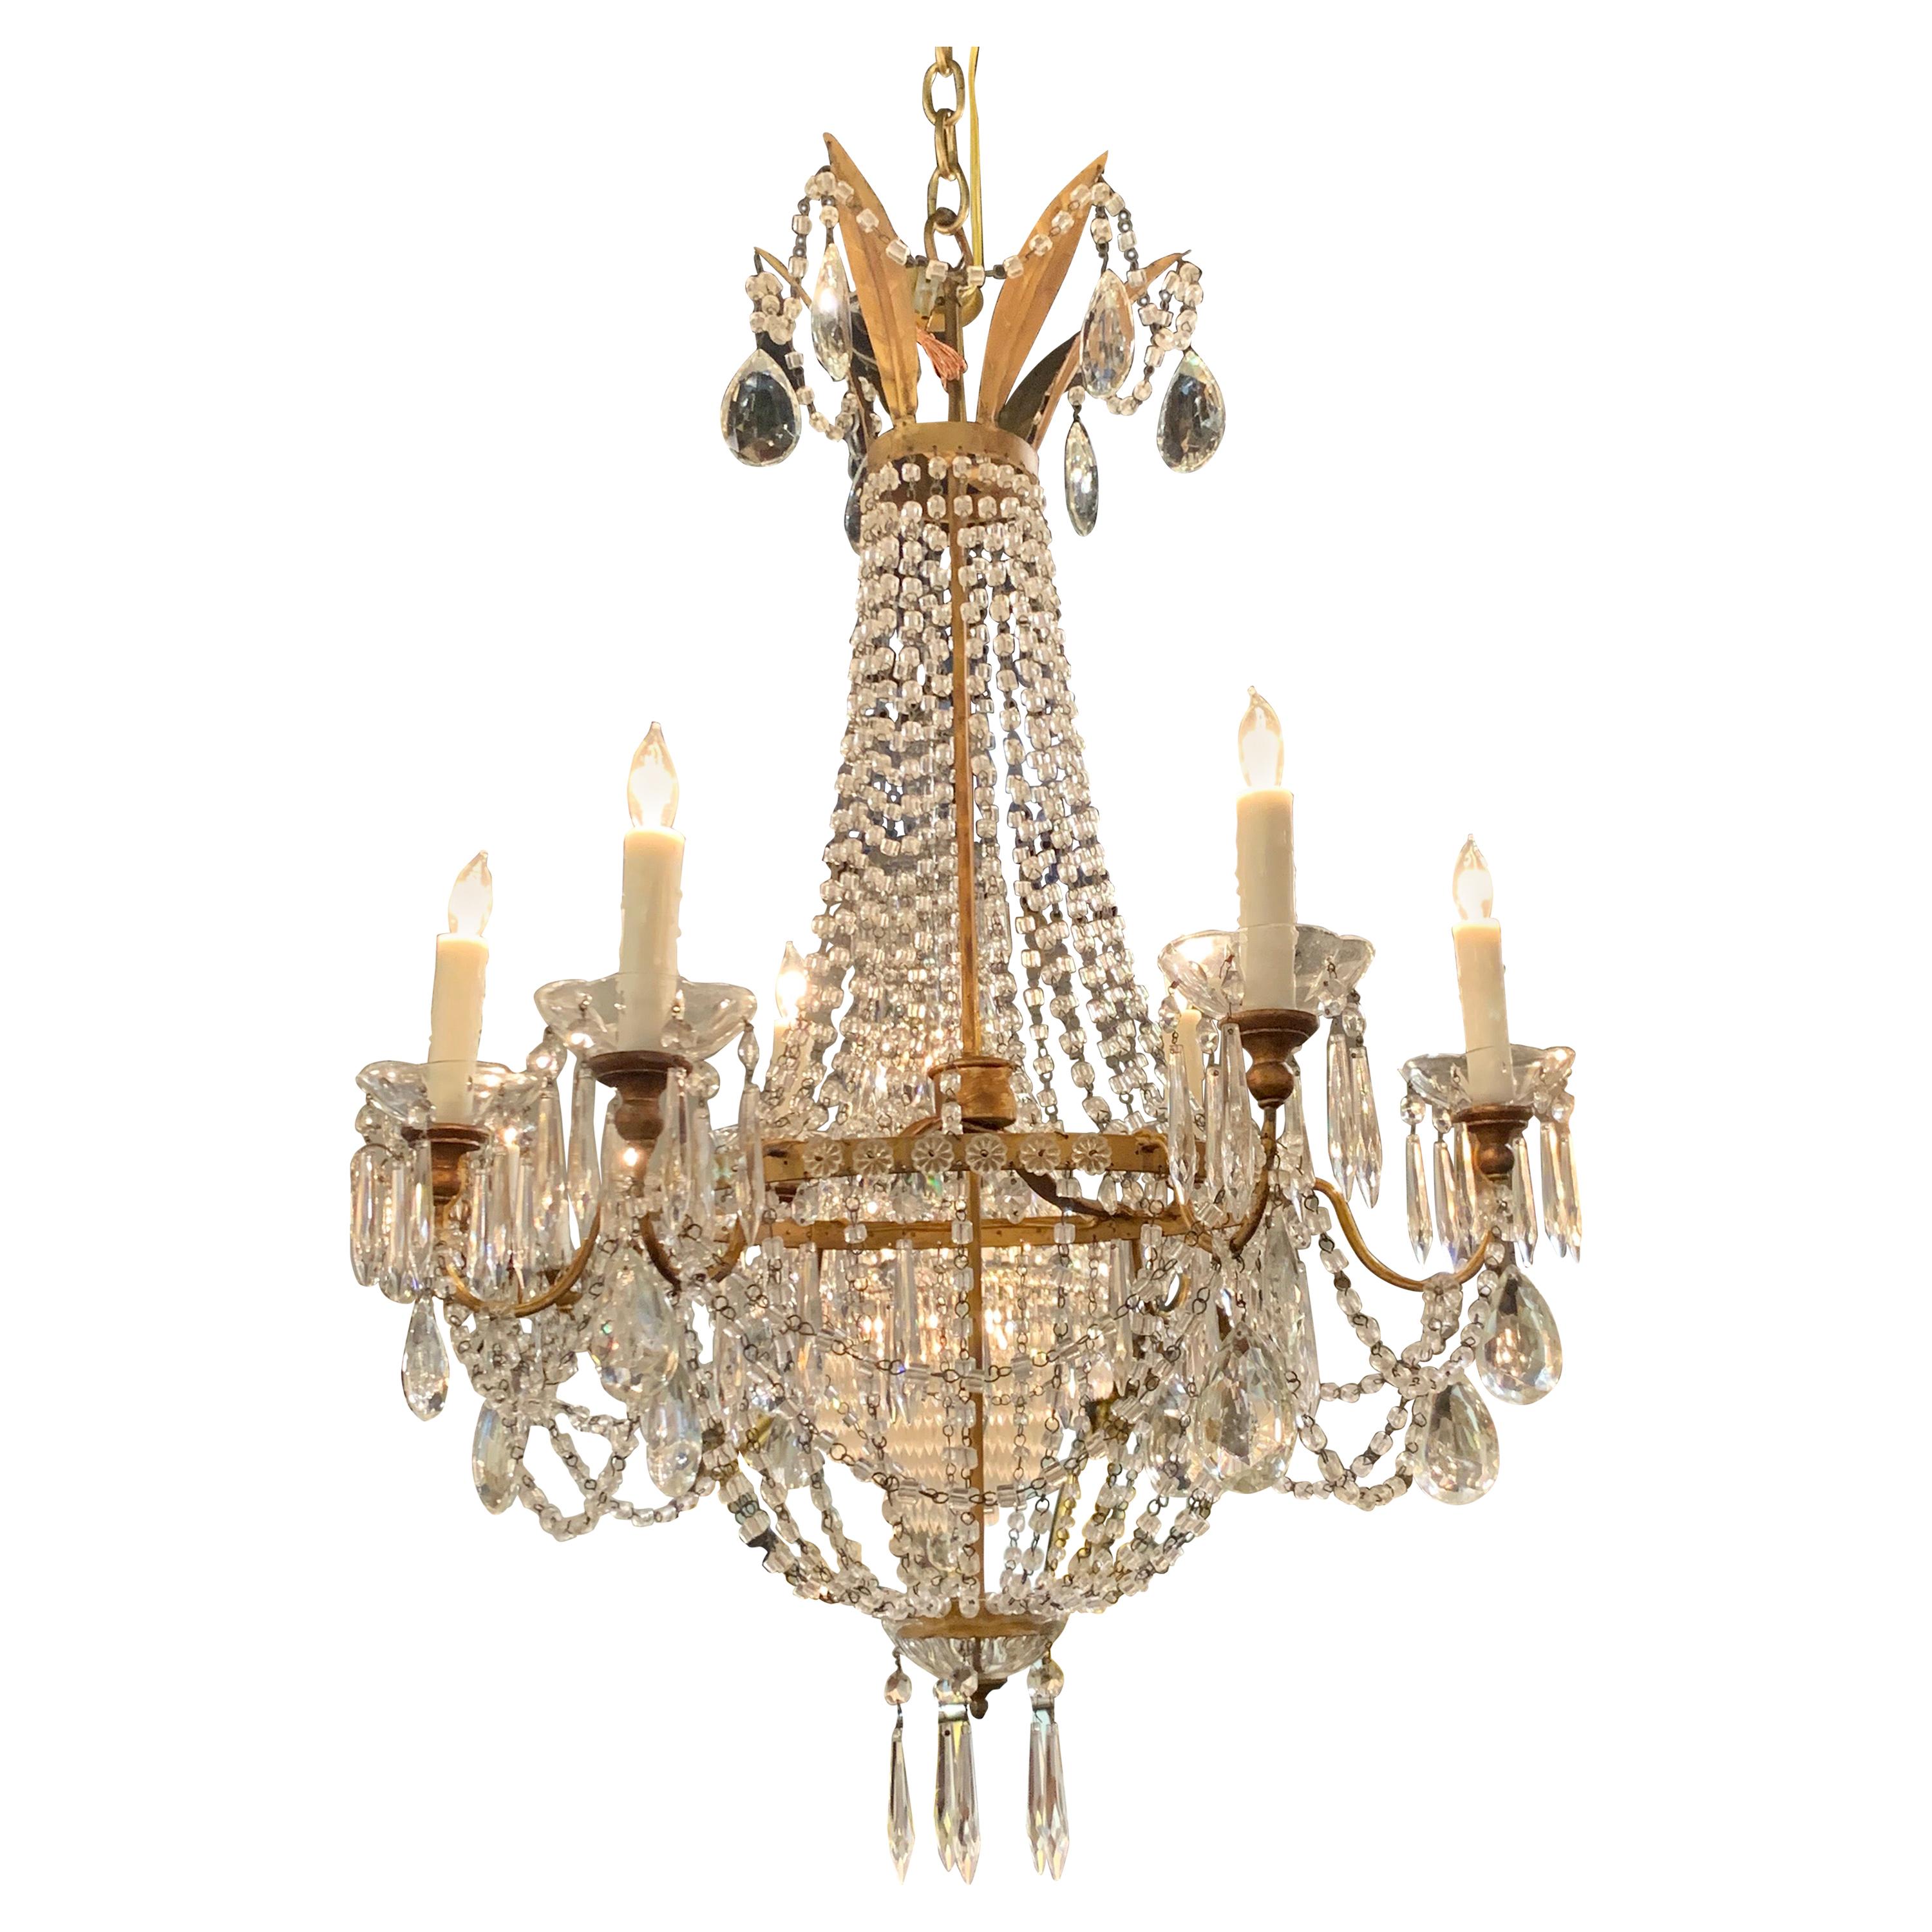 19th Century Italian Empire Style Gilt Metal and Crystal Chandelier For Sale